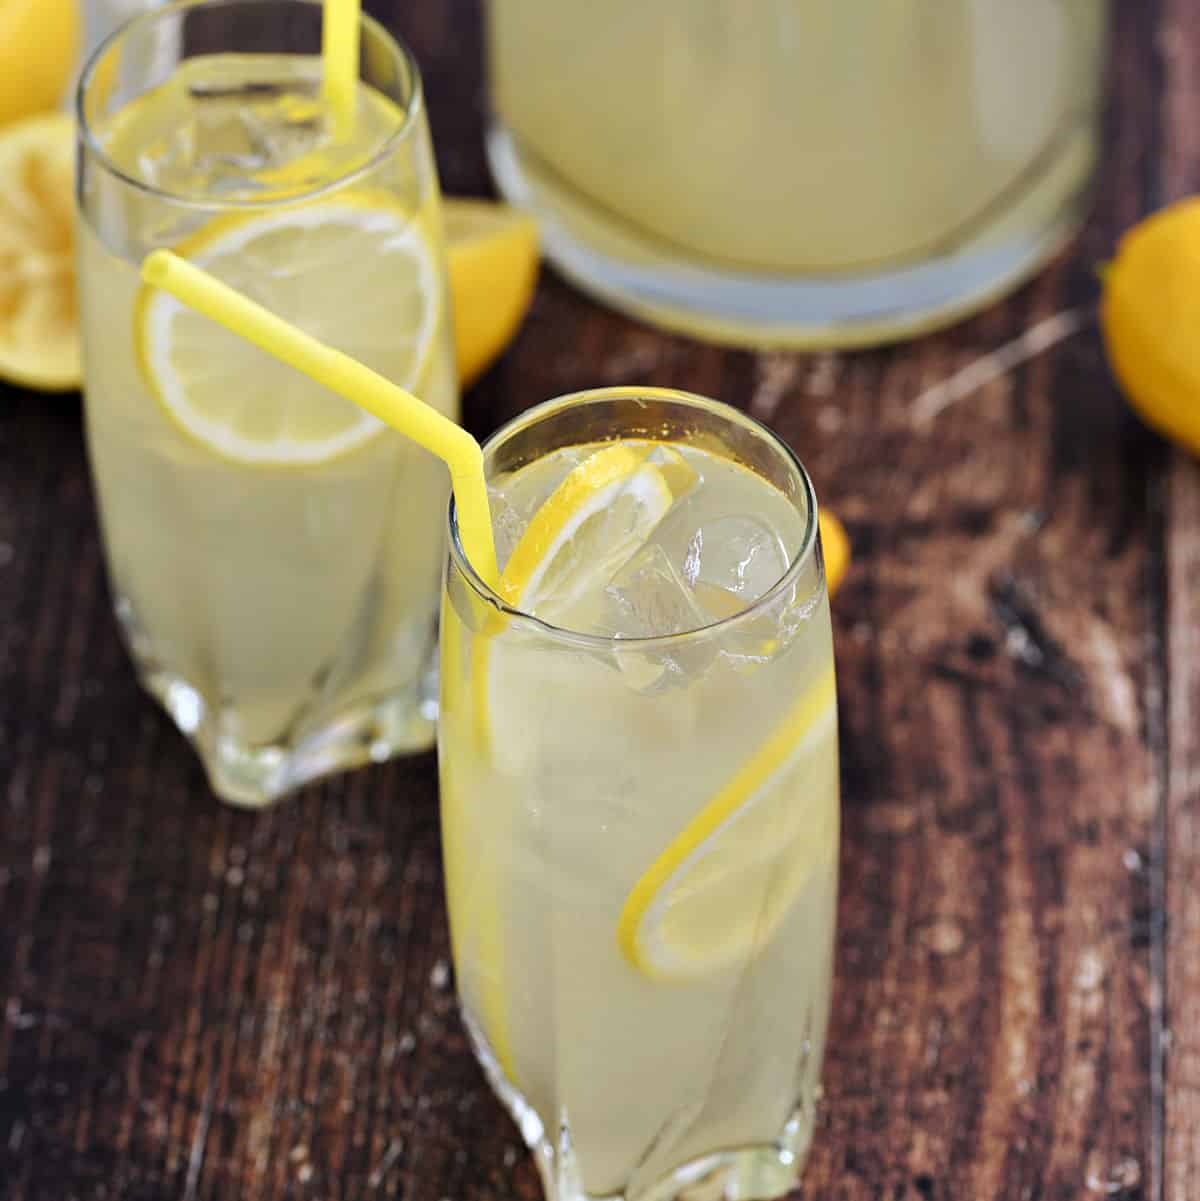 Two glasses and one glass pitcher filled with lemonade and lemon slices and yellow straws.